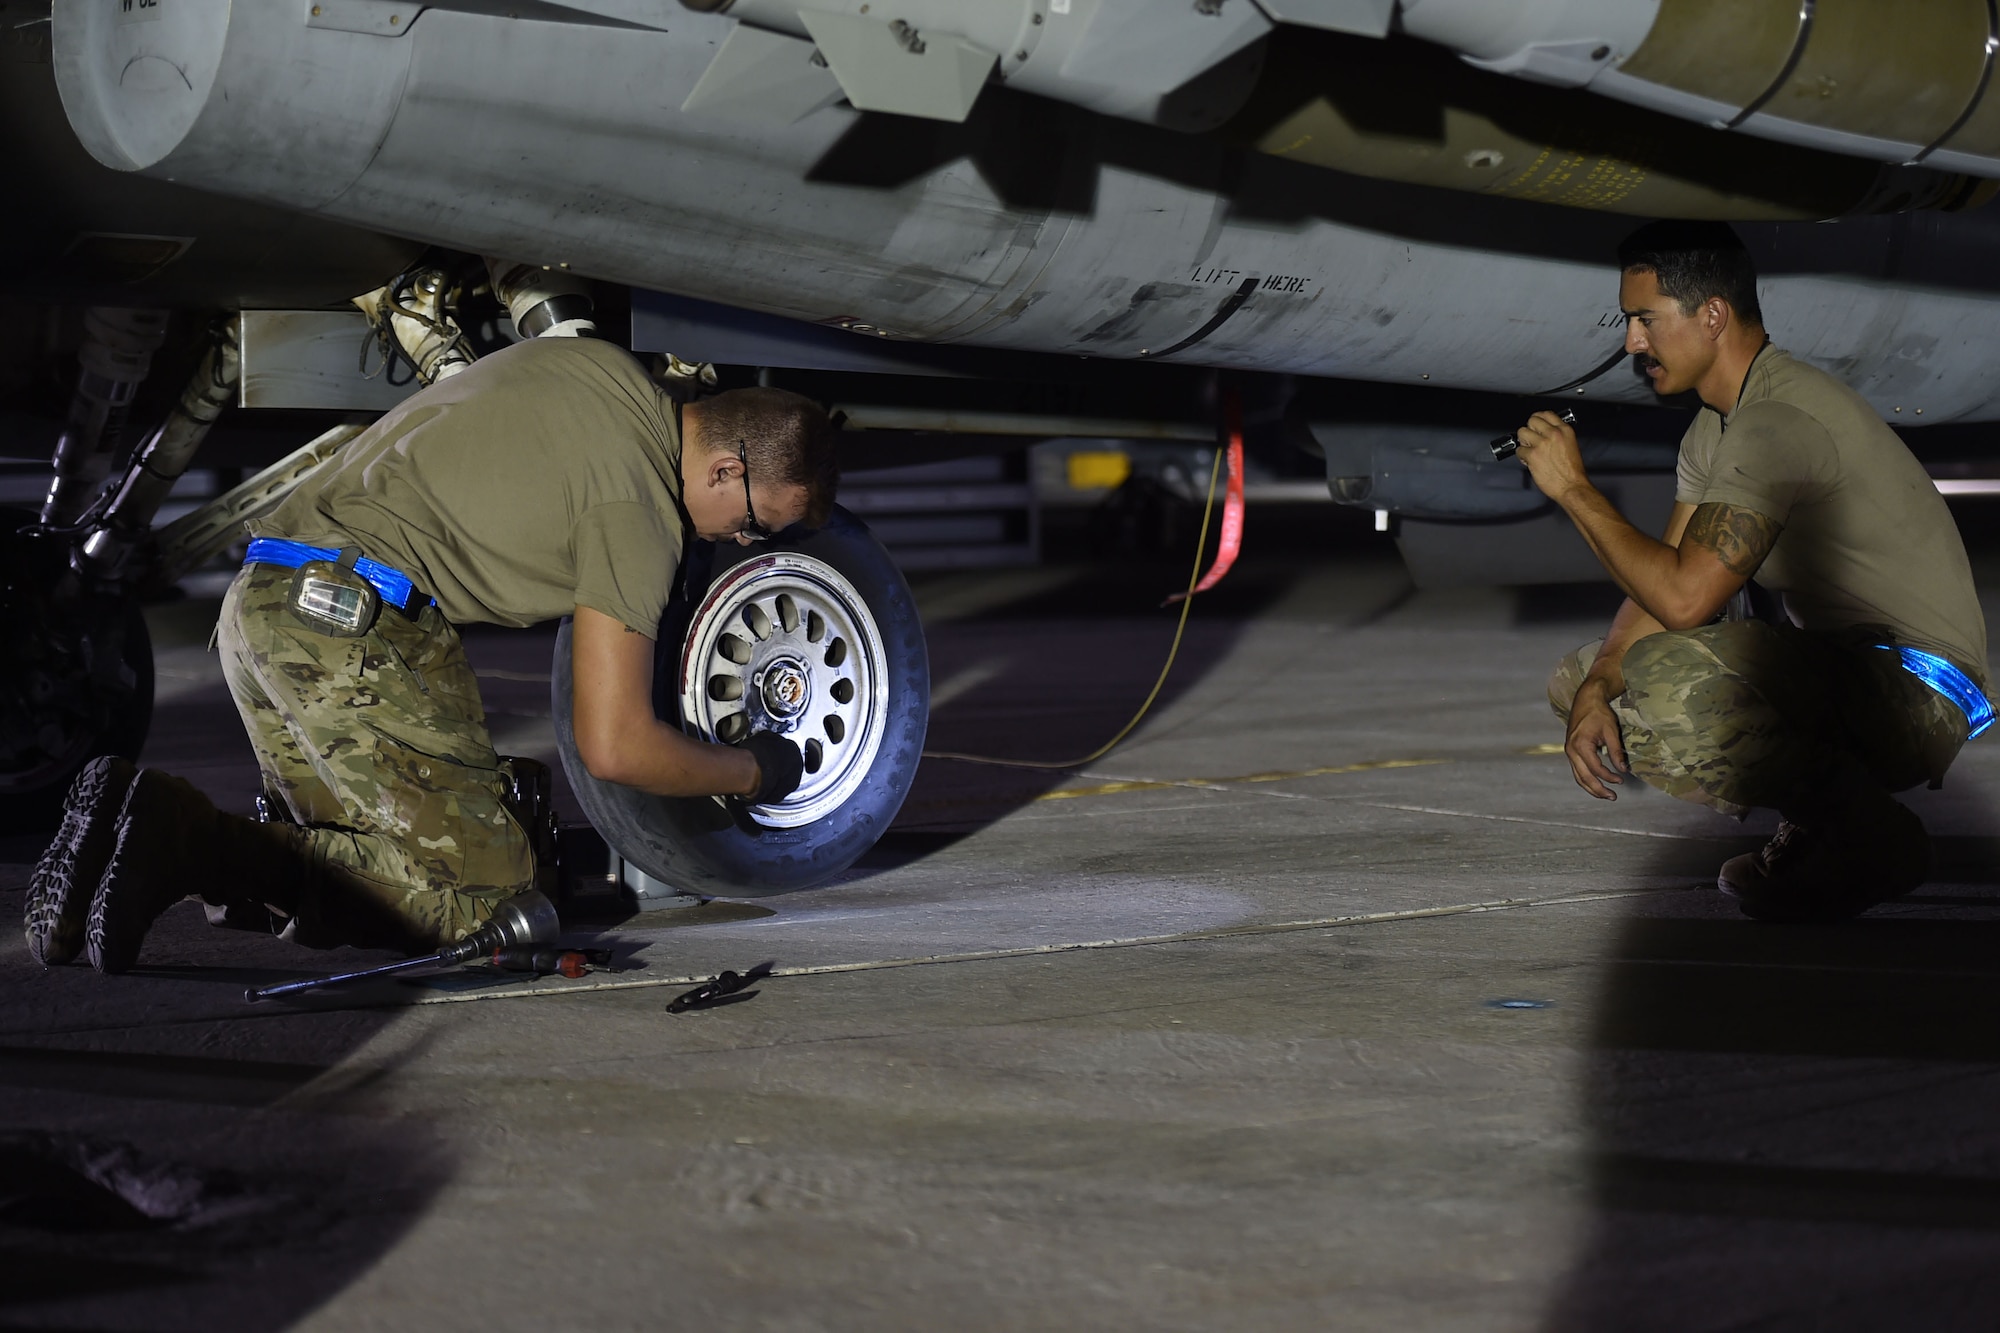 Two Airmen change a tire on a jet at night.